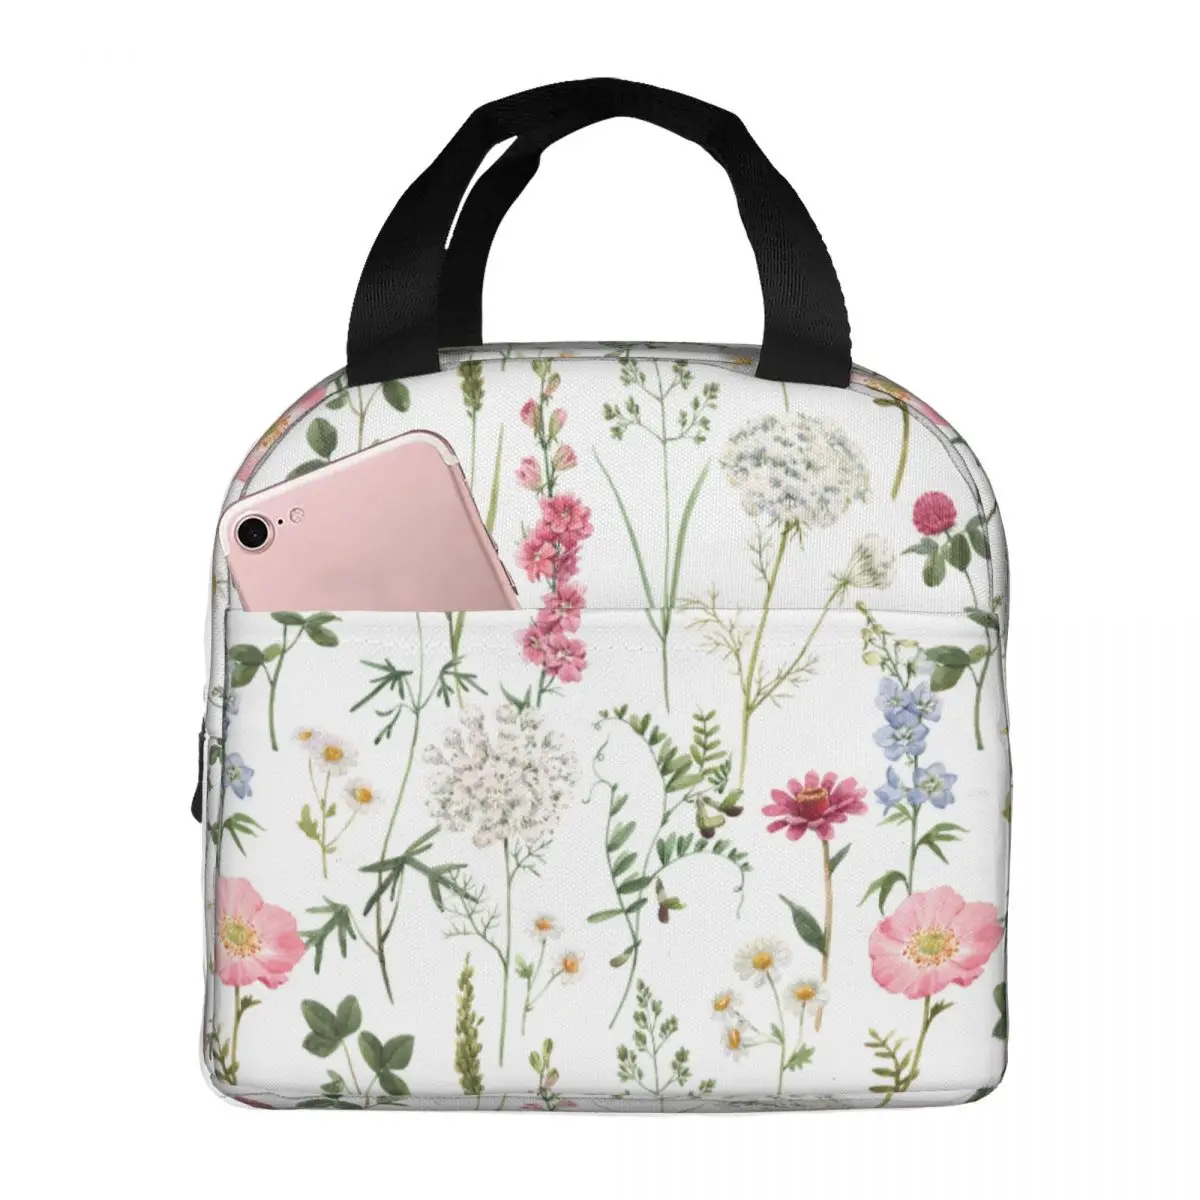 Watercolor Floral Delphinium Chamomile Poppy Lunch Bag Portable Insulated Cooler Bags Thermal School Lunch Box for Women Kids